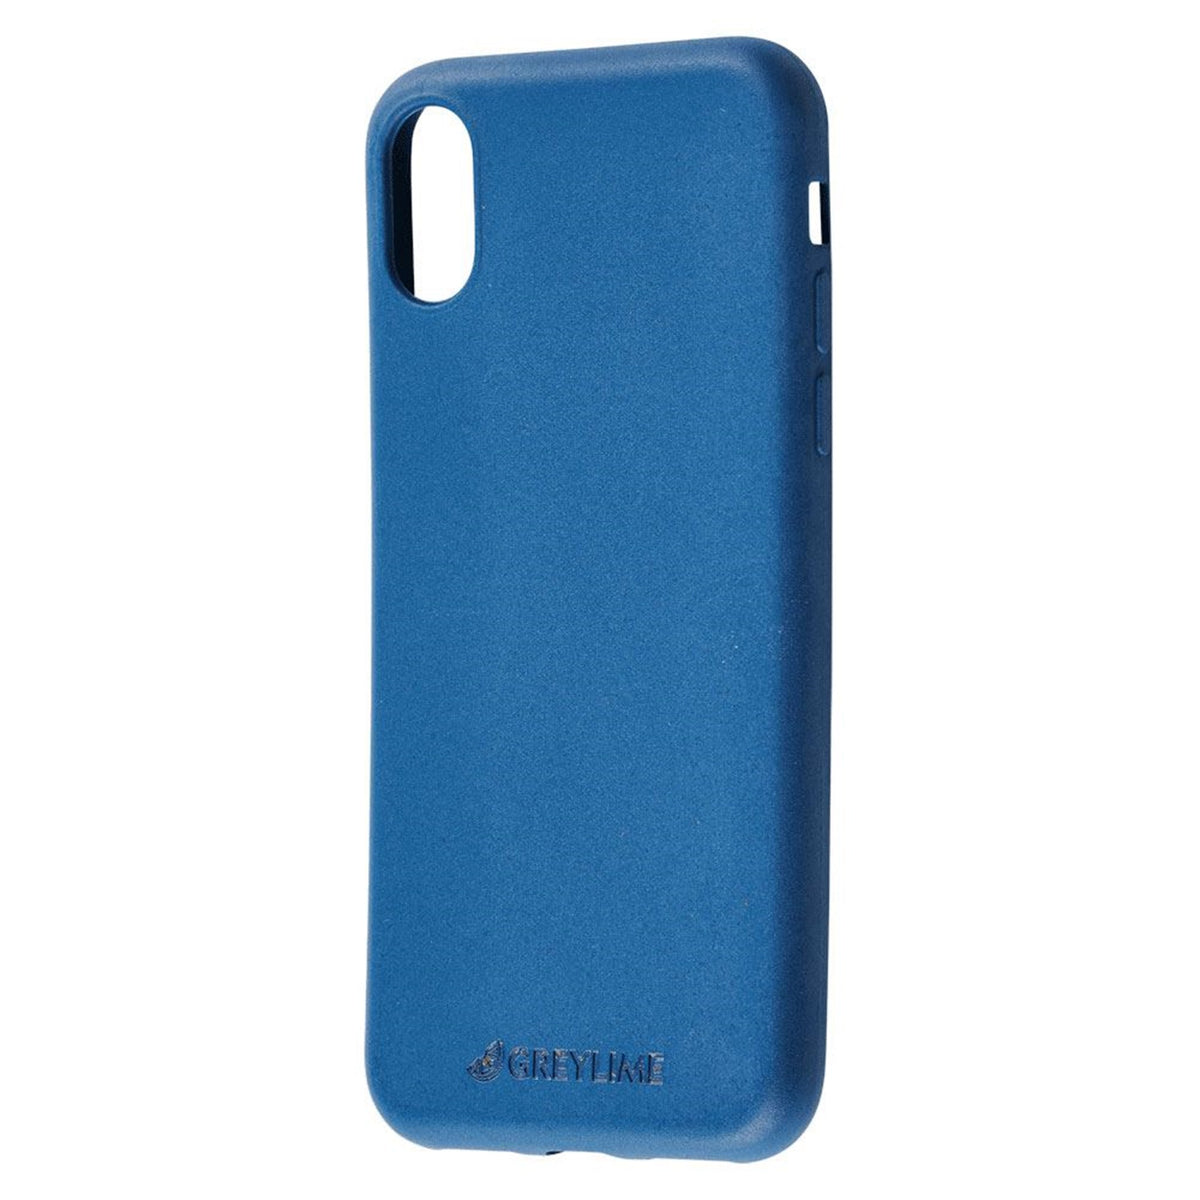 GreyLime-iPhone-X-XS-biodegradable-cover-Navy-blue-COIPXXS03-V2.jpg